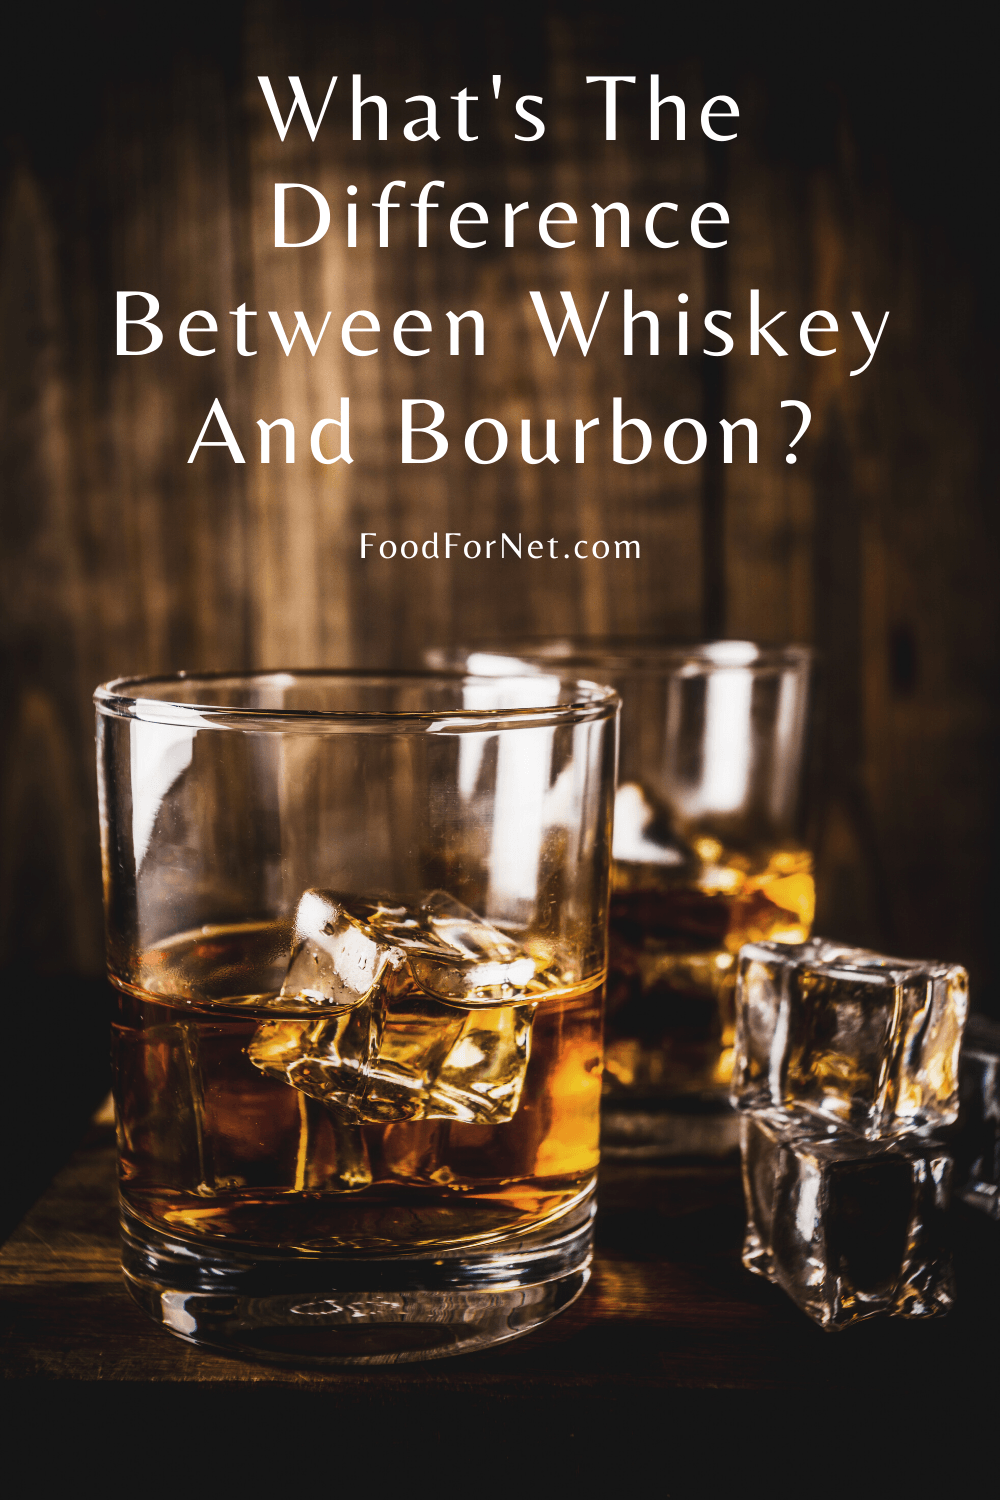 Whats The Difference Between Whiskey And Bourbon?